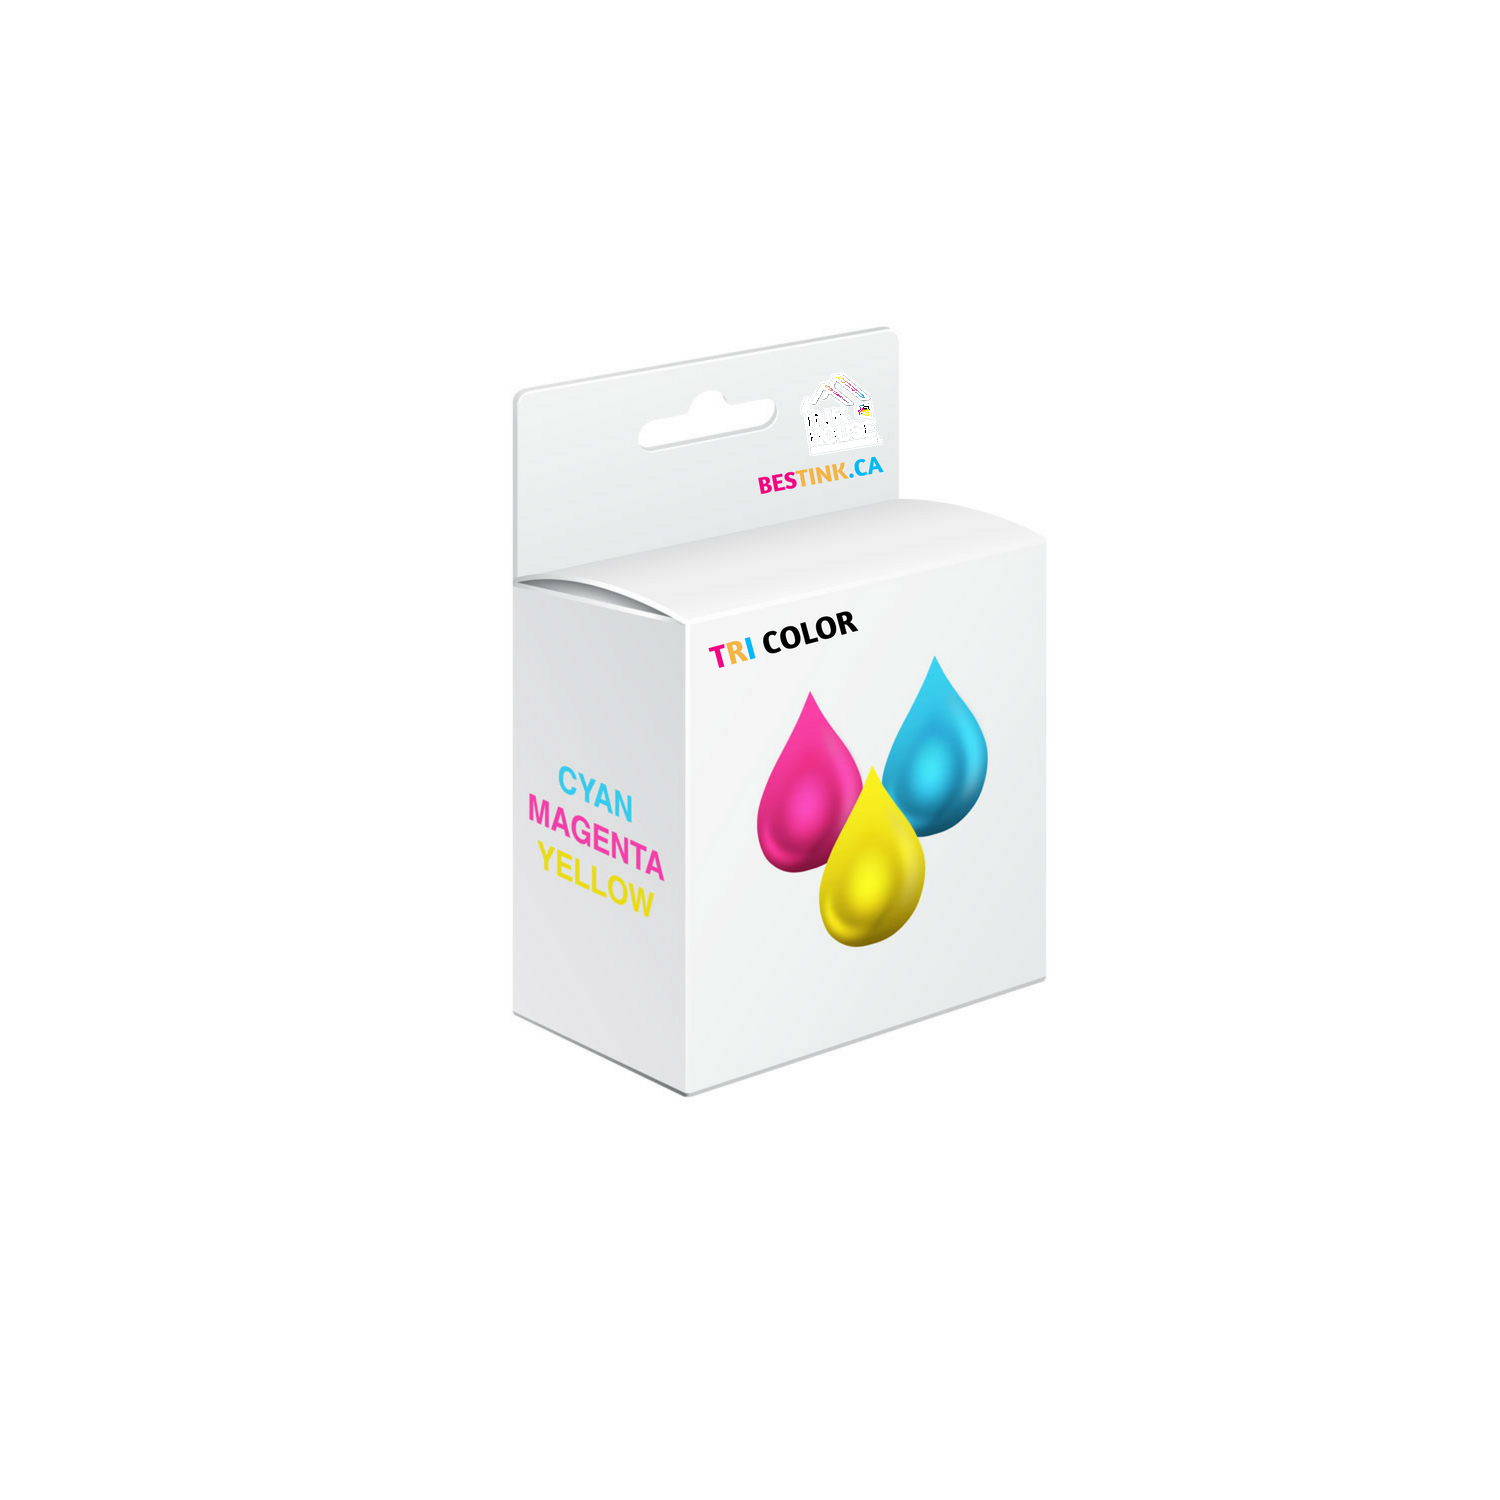 Generic High Yield Tri-Color Ink Cartridge for HP 63XL -Free Shipping Over $50